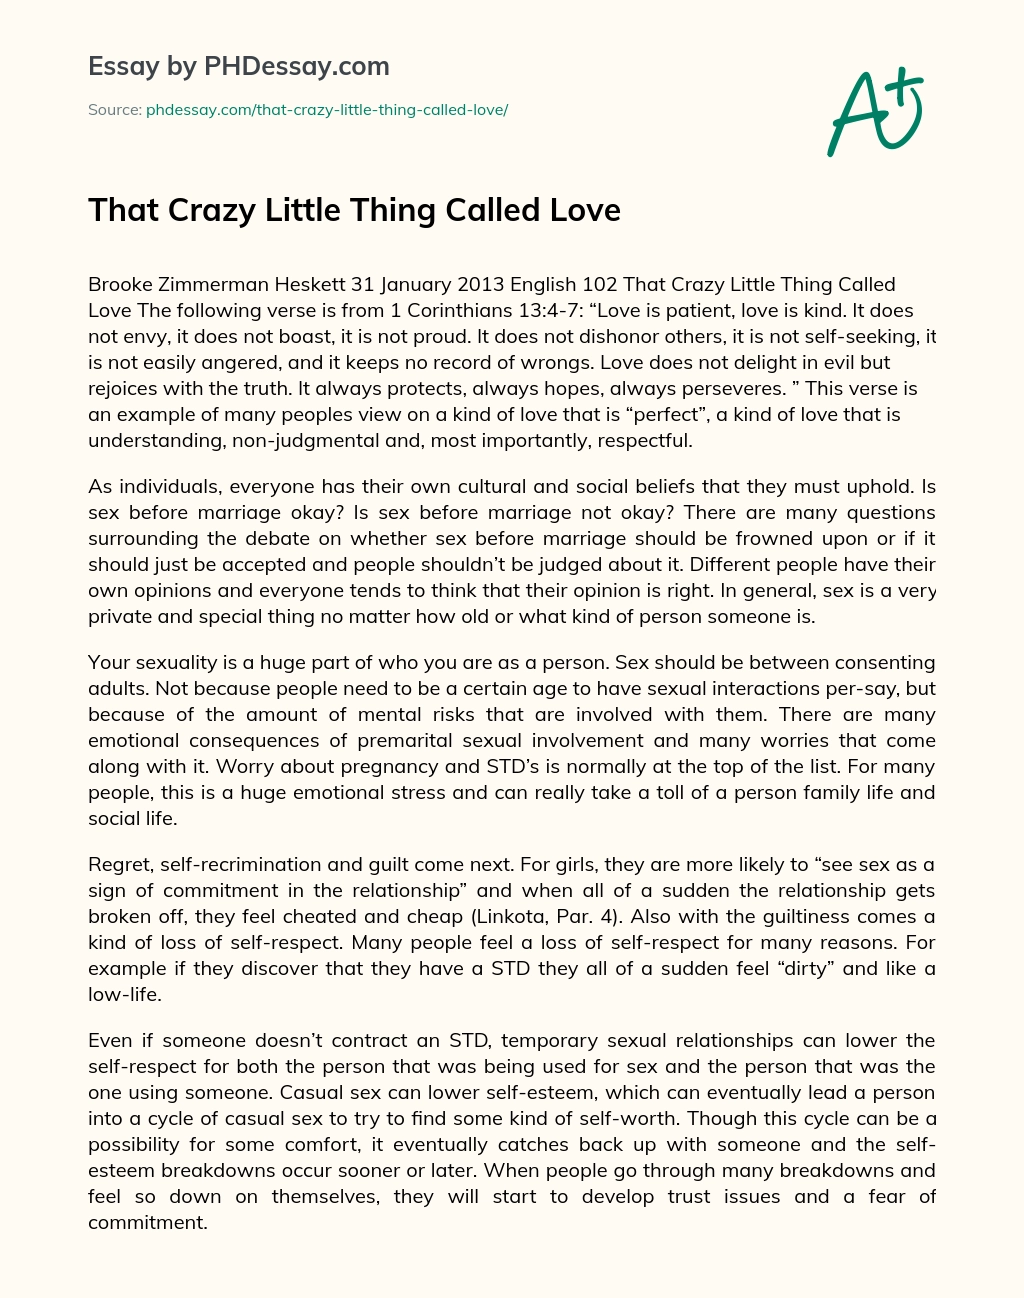 That Crazy Little Thing Called Love essay